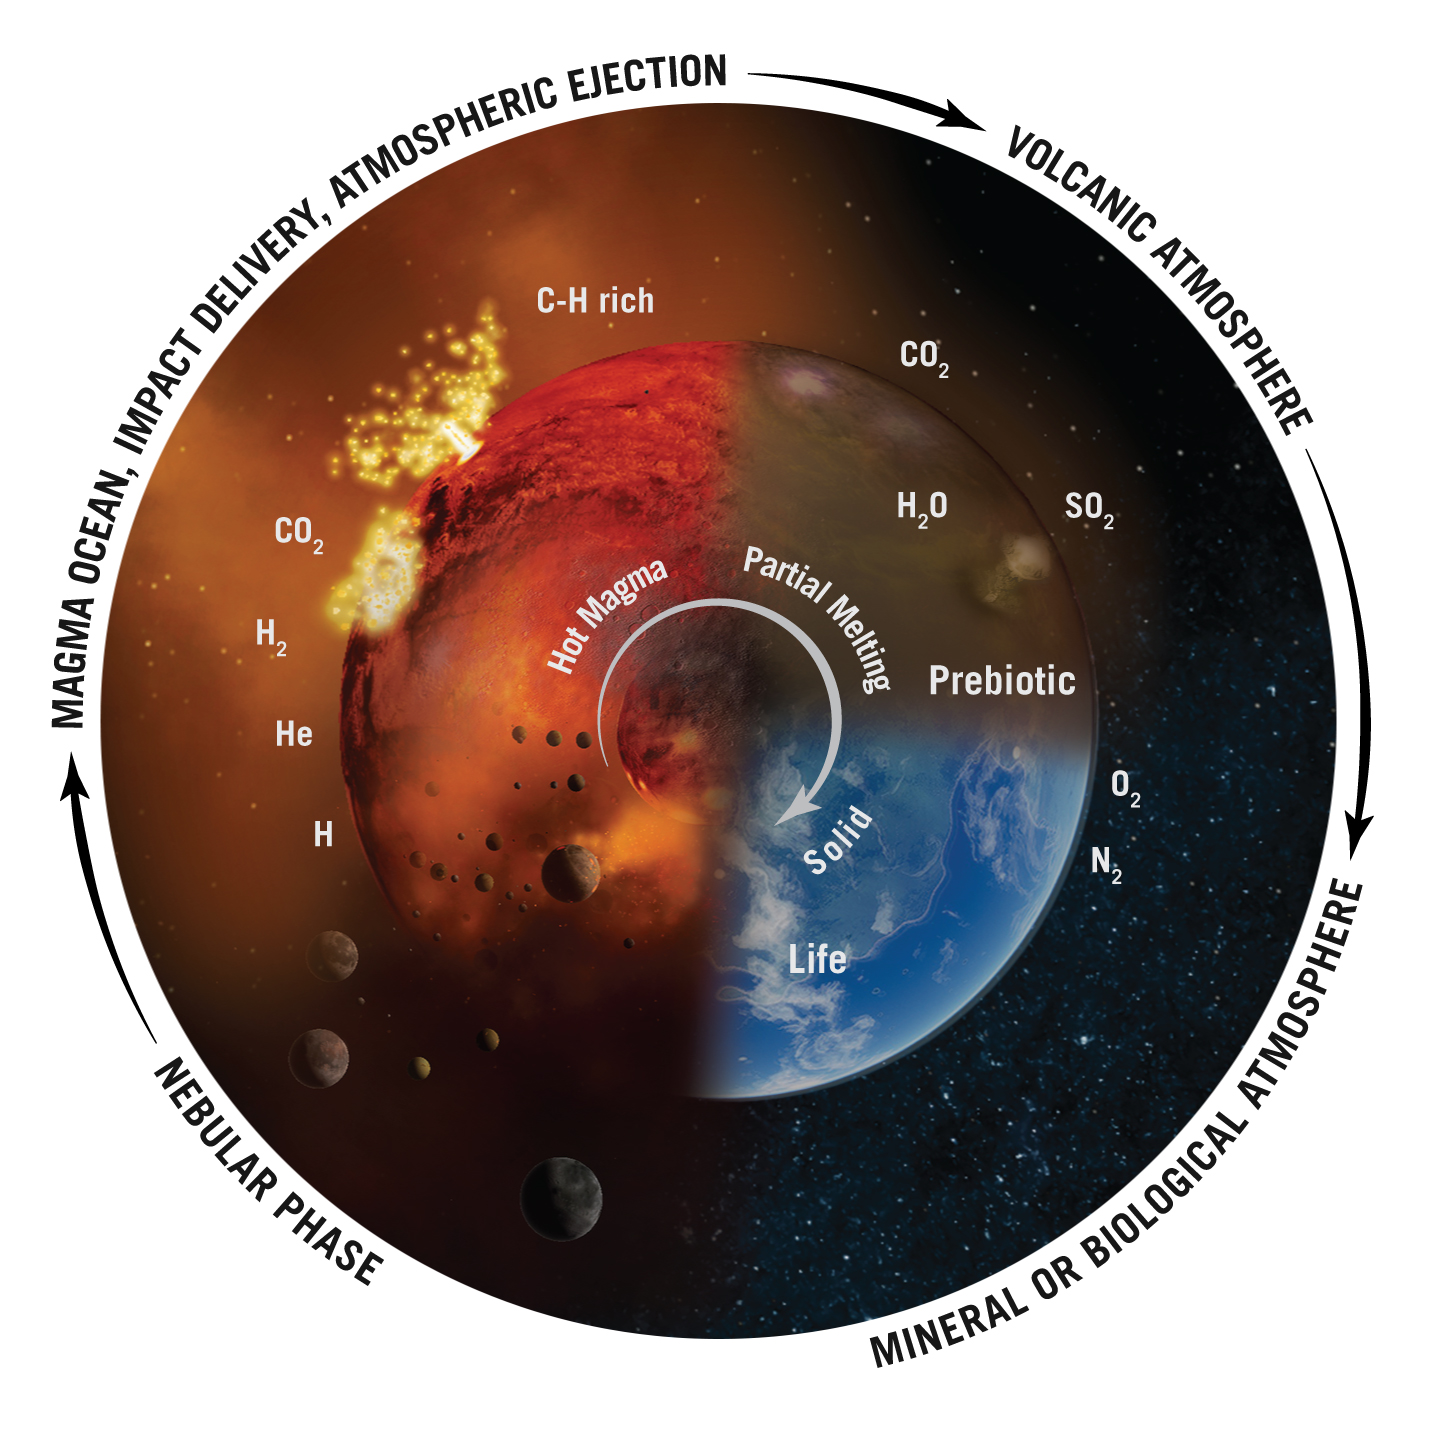 Characterising the cradle of prebiotic chemistry and life. Generalised evolution of a rocky planetary body: Boundary conditions such as size, proximity to host star, composition, orbital/dynamical environment during planetary formation and evolution influence planetary environments, available chemical pathways, and the capacity of any planet, including our own, to support life.